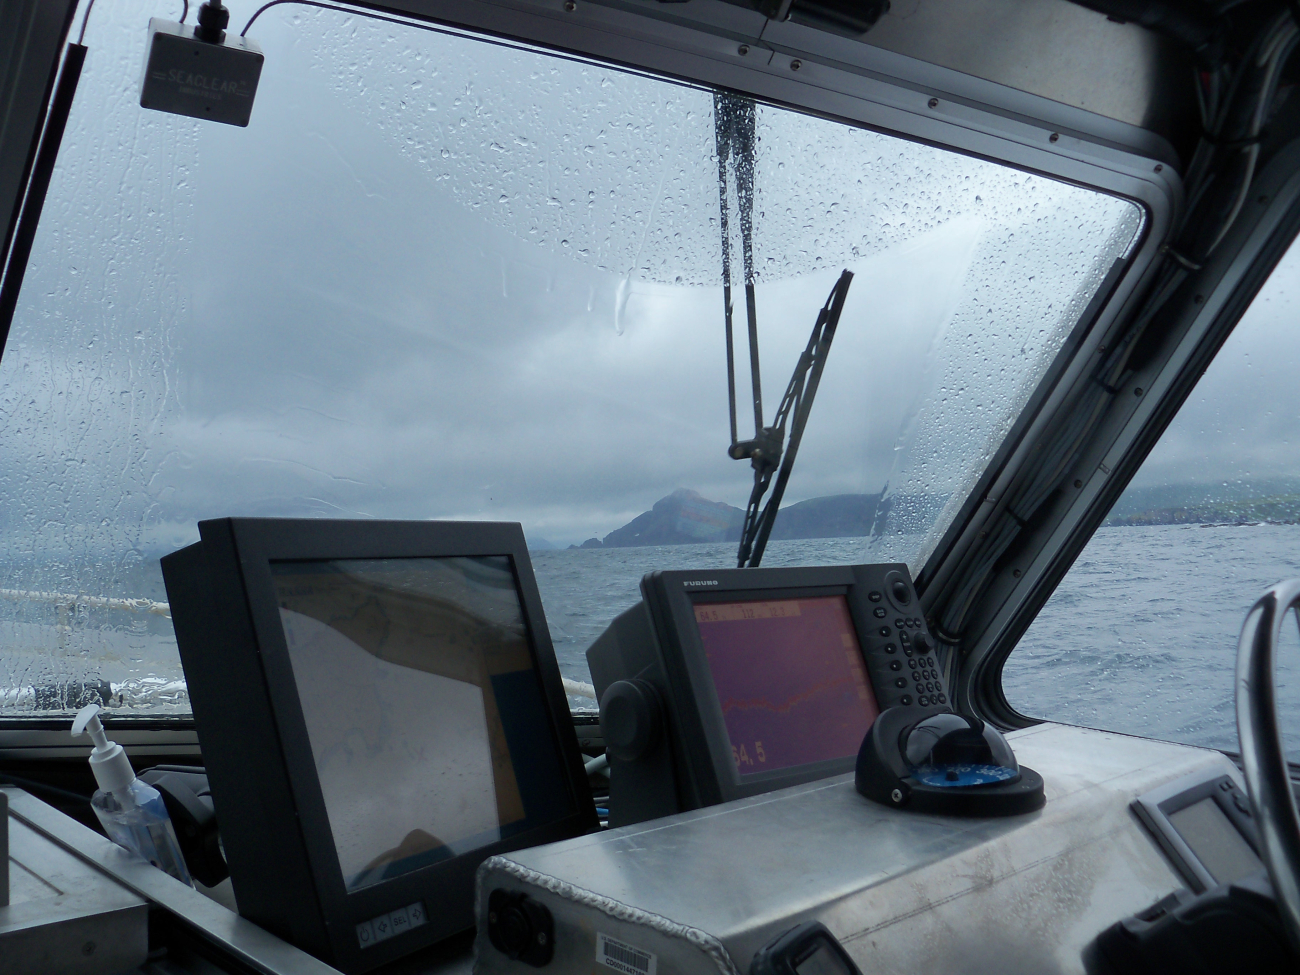 A combination of spray and rain partially obstructing vision while working inthe Pavlof Islands